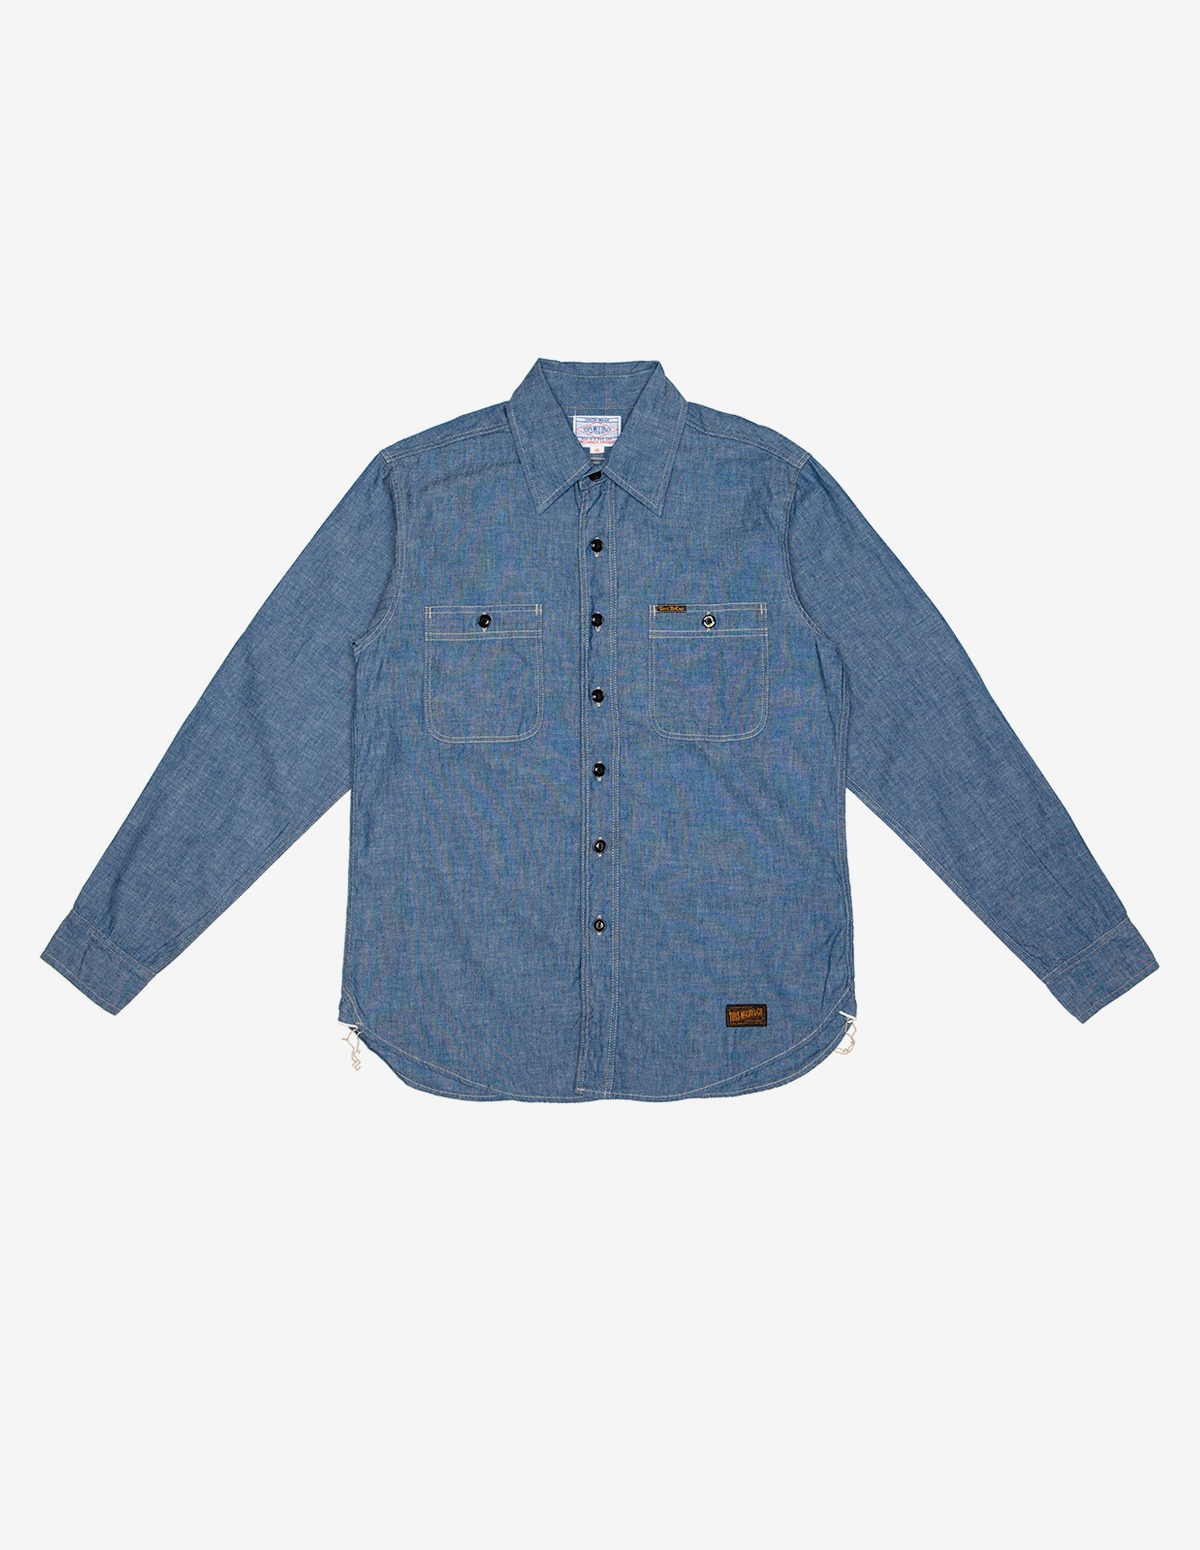 TMS2104 McHILL OVERALLS NEW CHAMBRAY WORK SHIRT